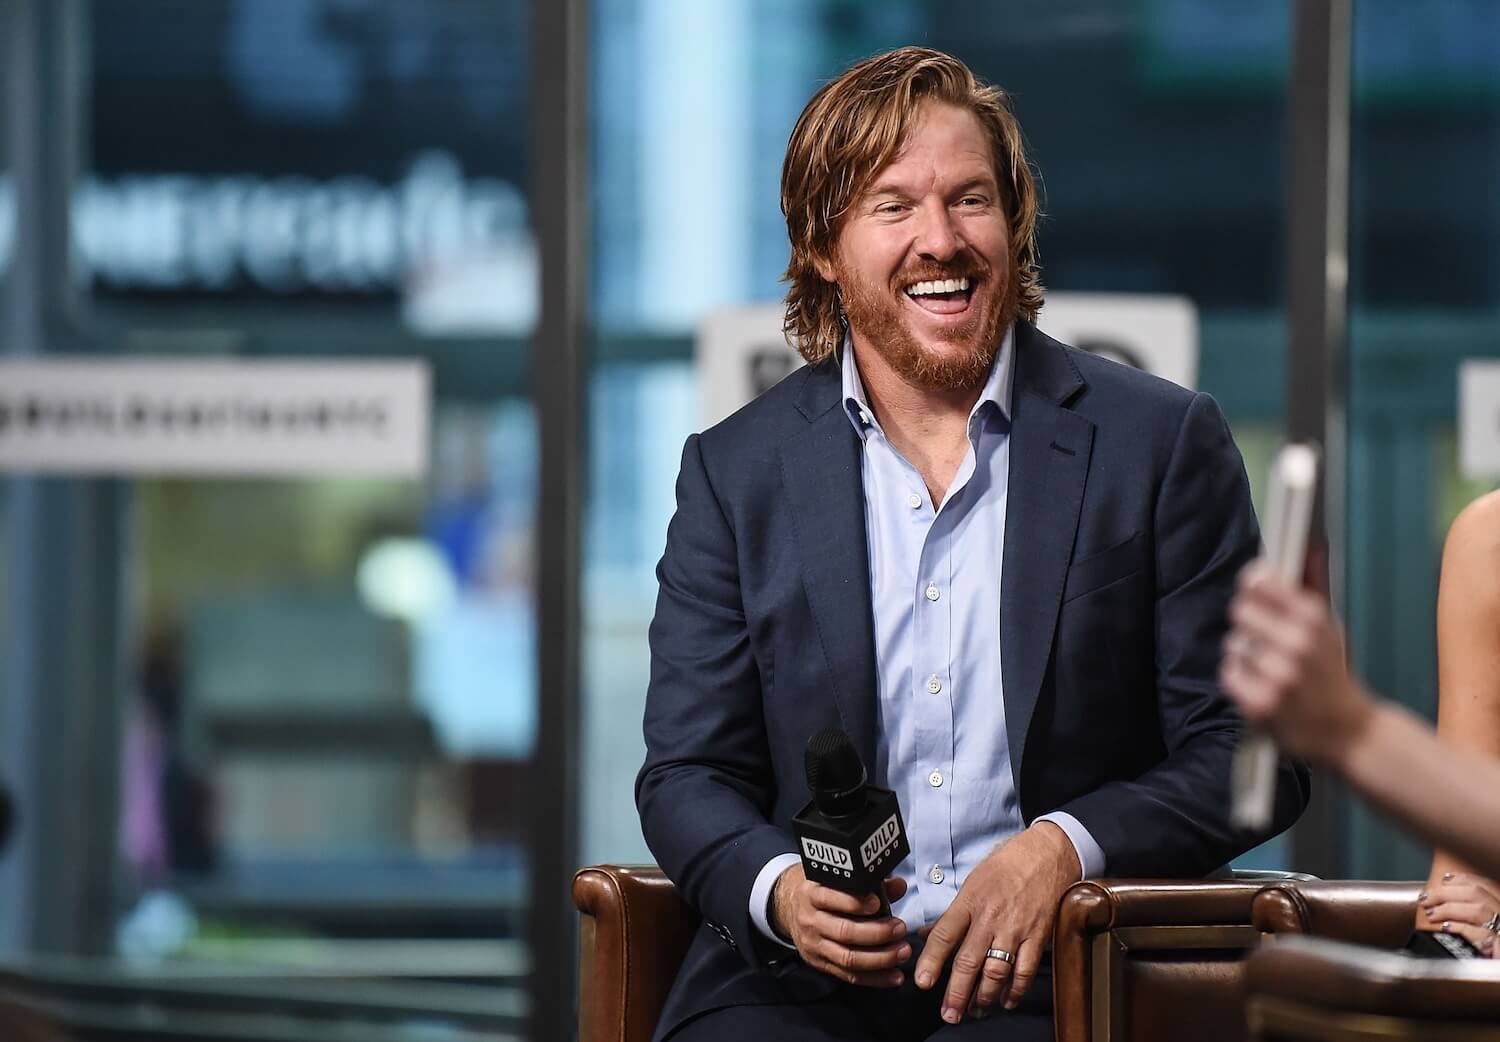 Joanna Gaines' husband, Chip Gaines, from 'Fixer Upper' and the Magnolia brand, smiling during an interview